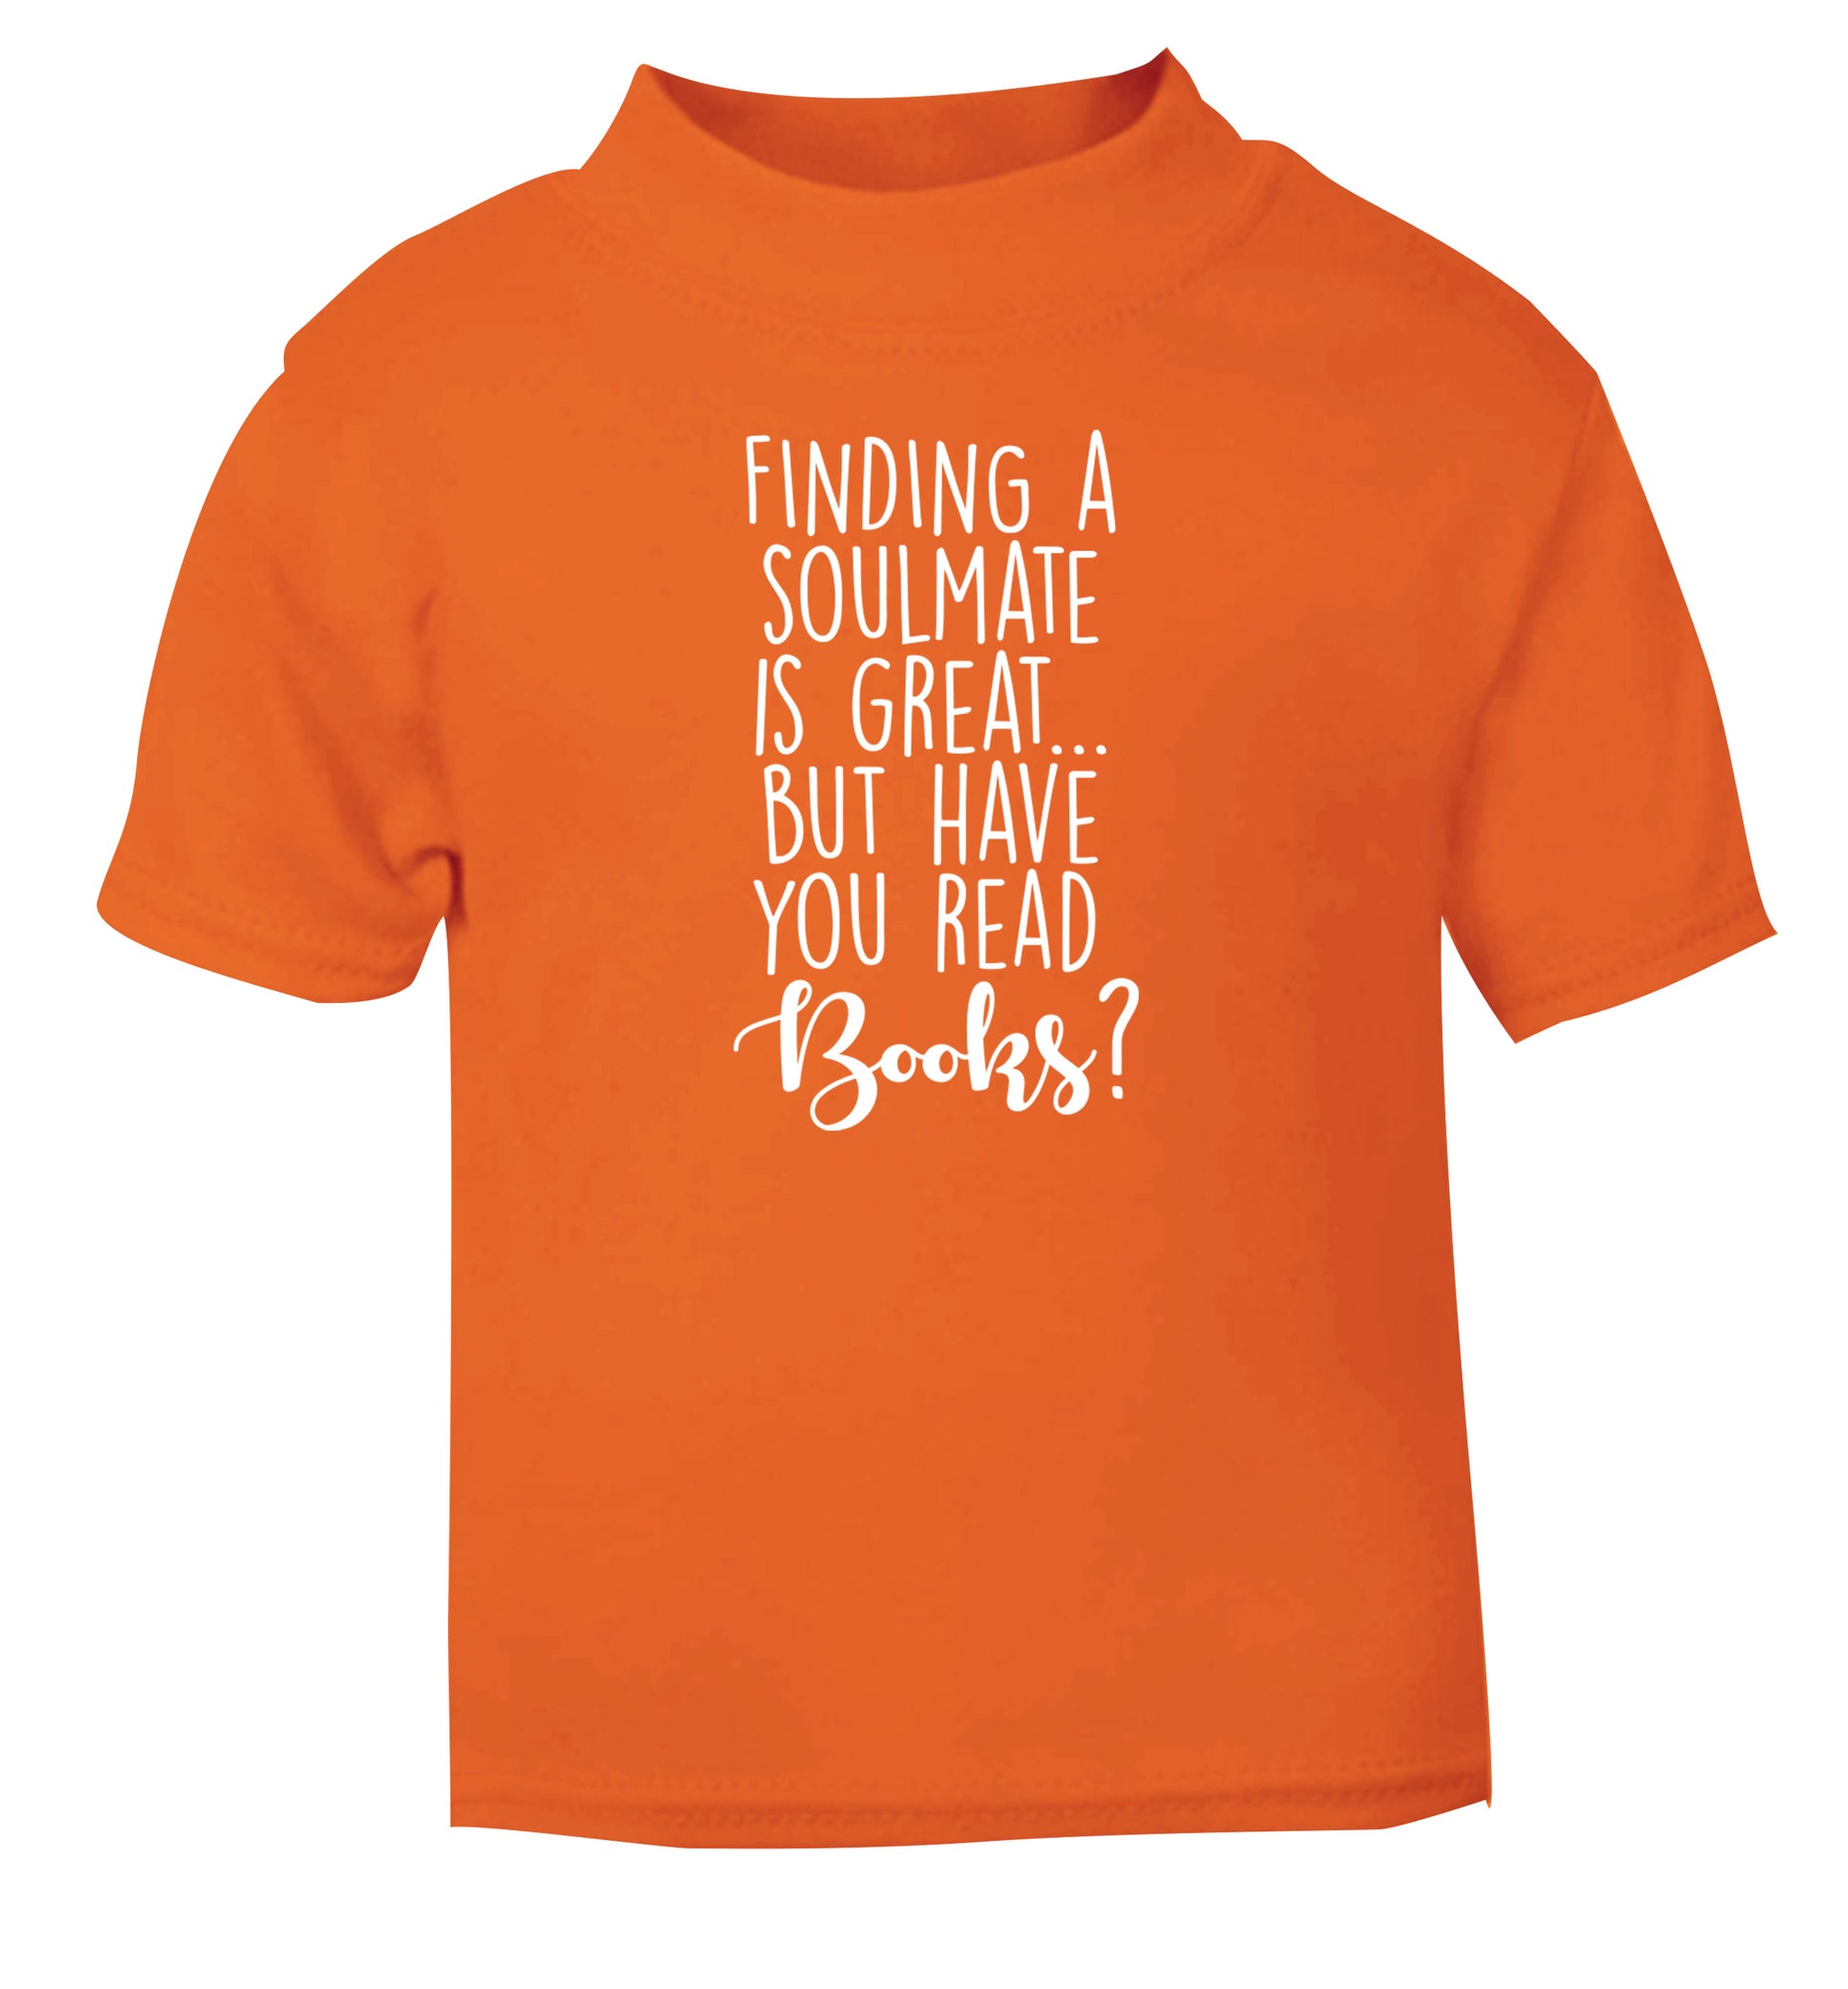 Finding a soulmate is great but have you read books? orange Baby Toddler Tshirt 2 Years